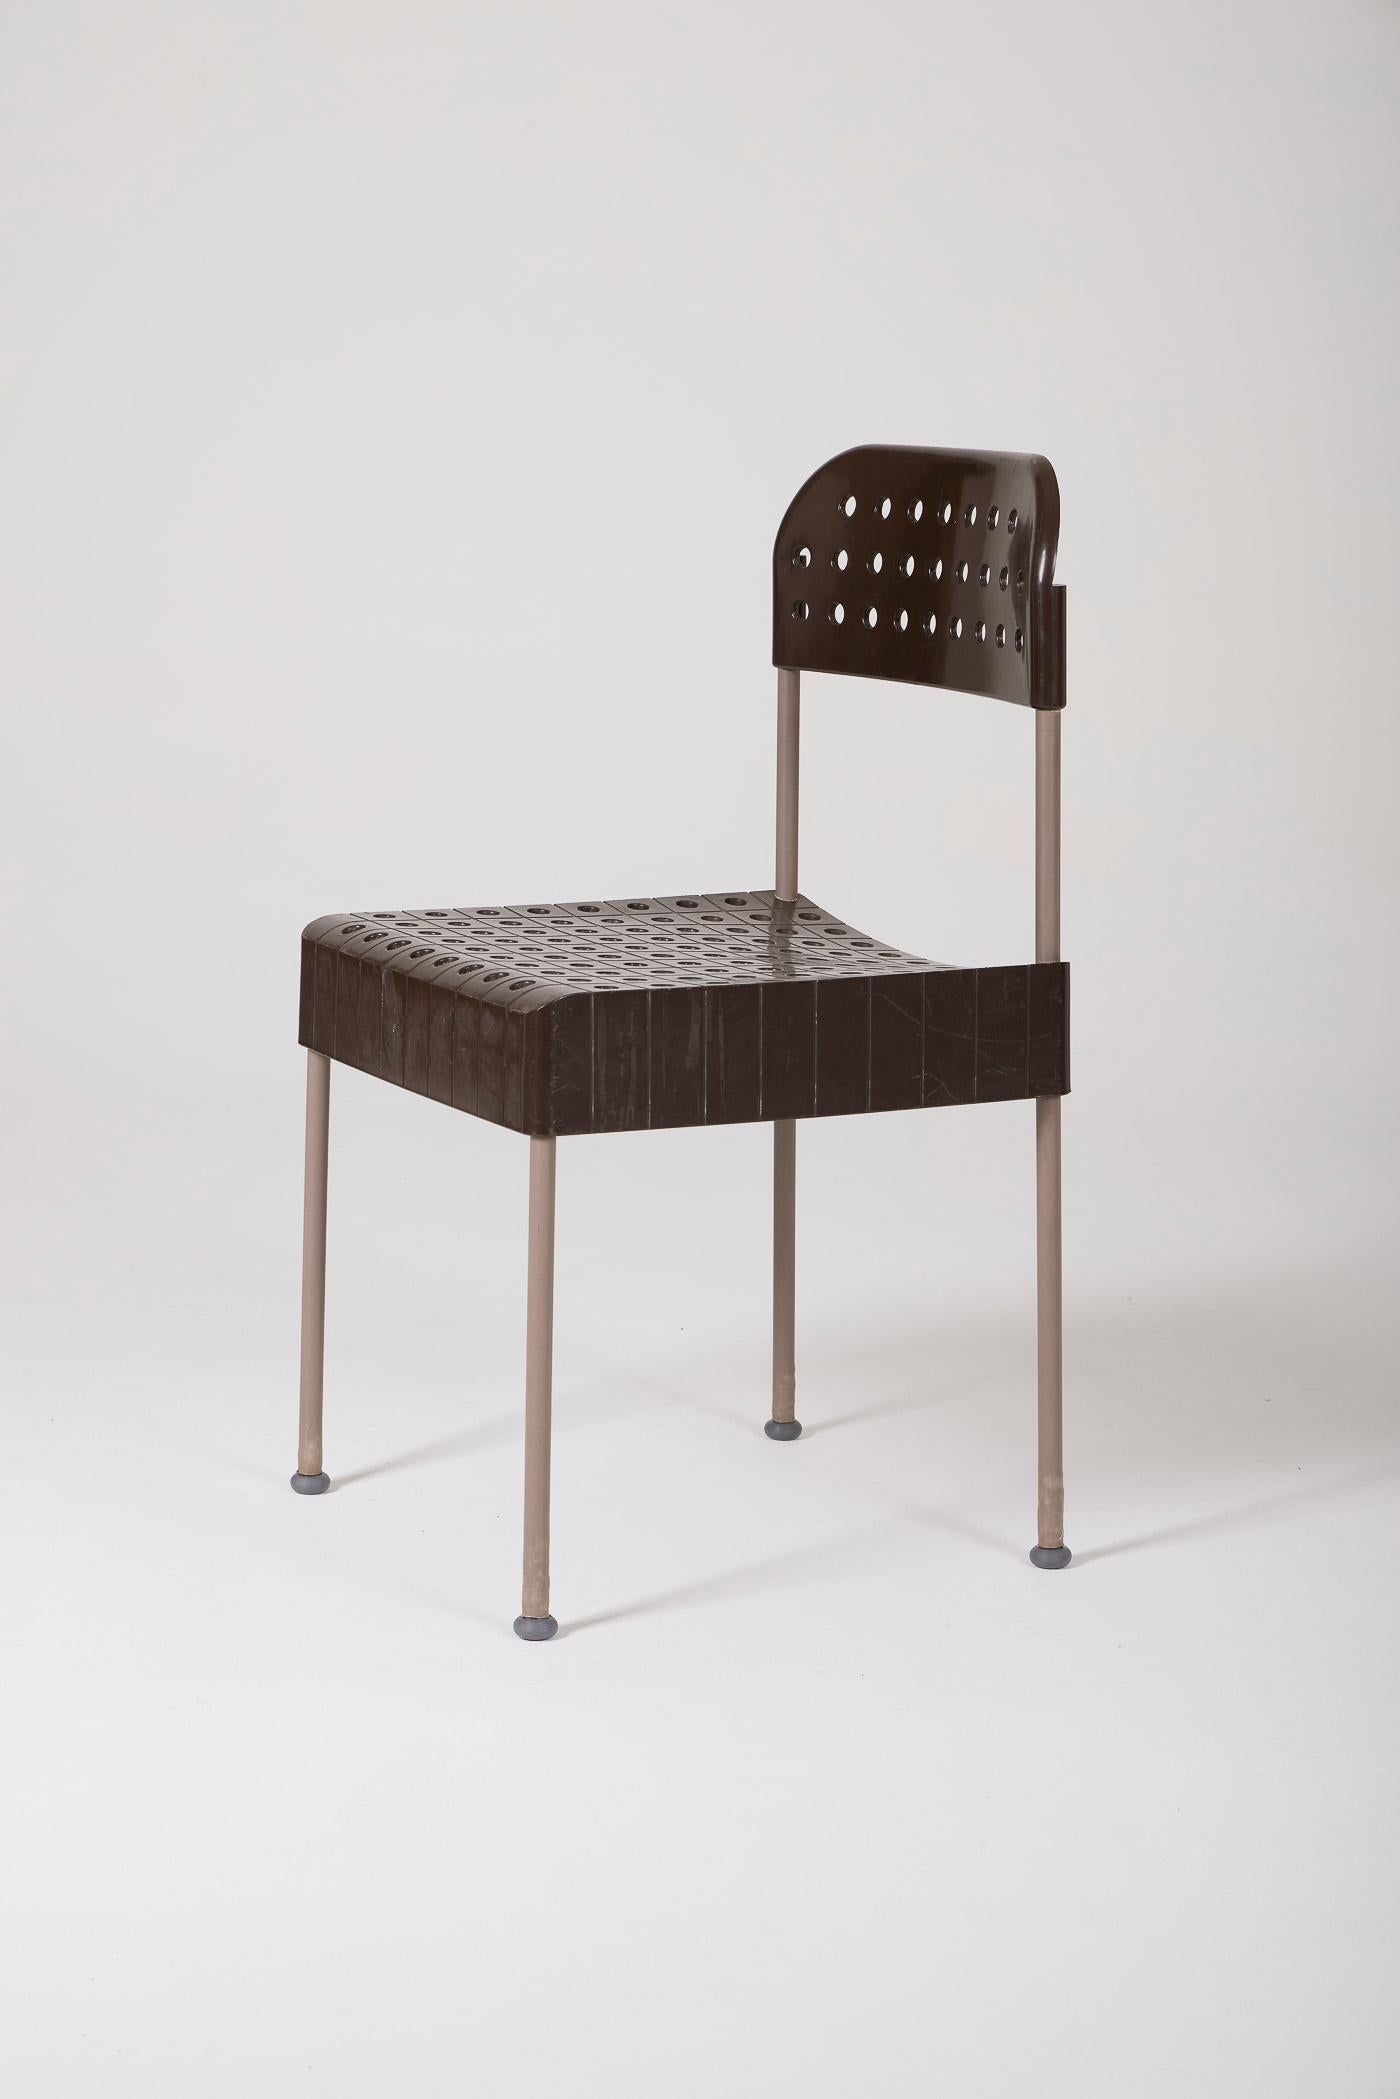 Box model chair by designer Enzo Mari (1932-2020) for Castelli. 1970. Metal structure covered in gray lacquered PVC. Perforated seat and back in brown plastic. In good condition.
DV56